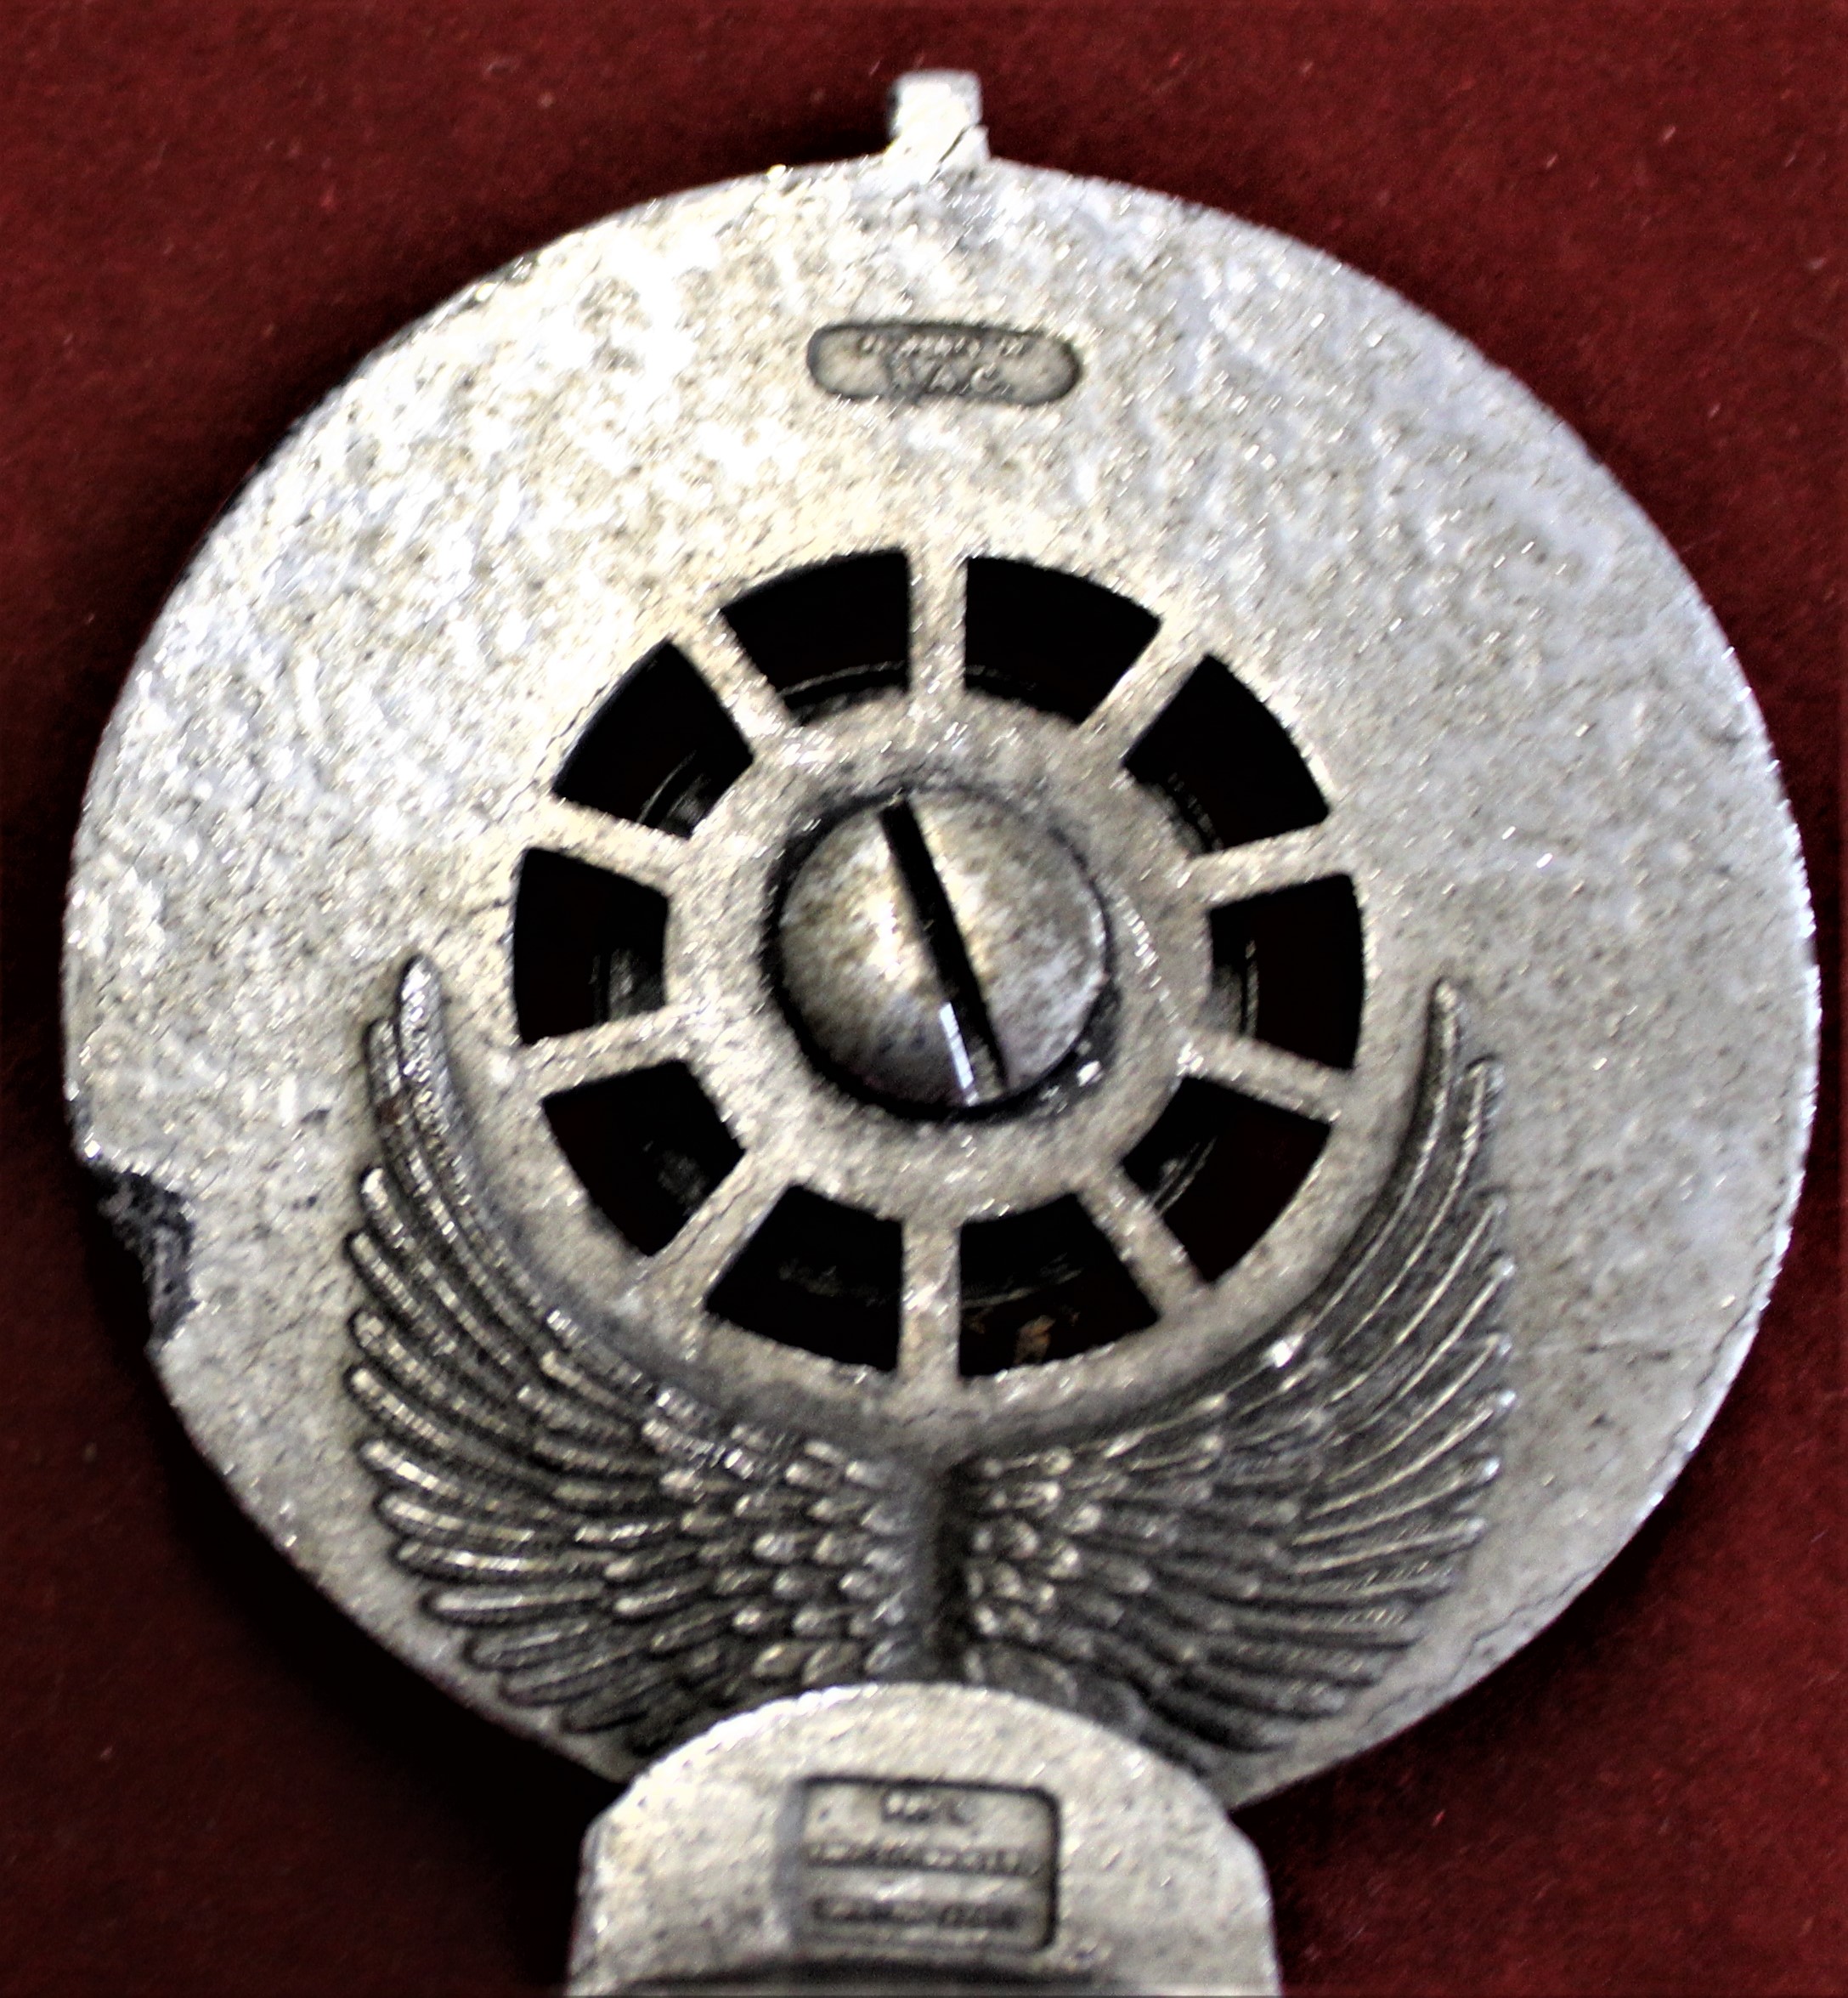 Royal Automobile Club Association Enamel Car Badge F4723, c.1930s, with fitting for attaching to a - Image 2 of 3